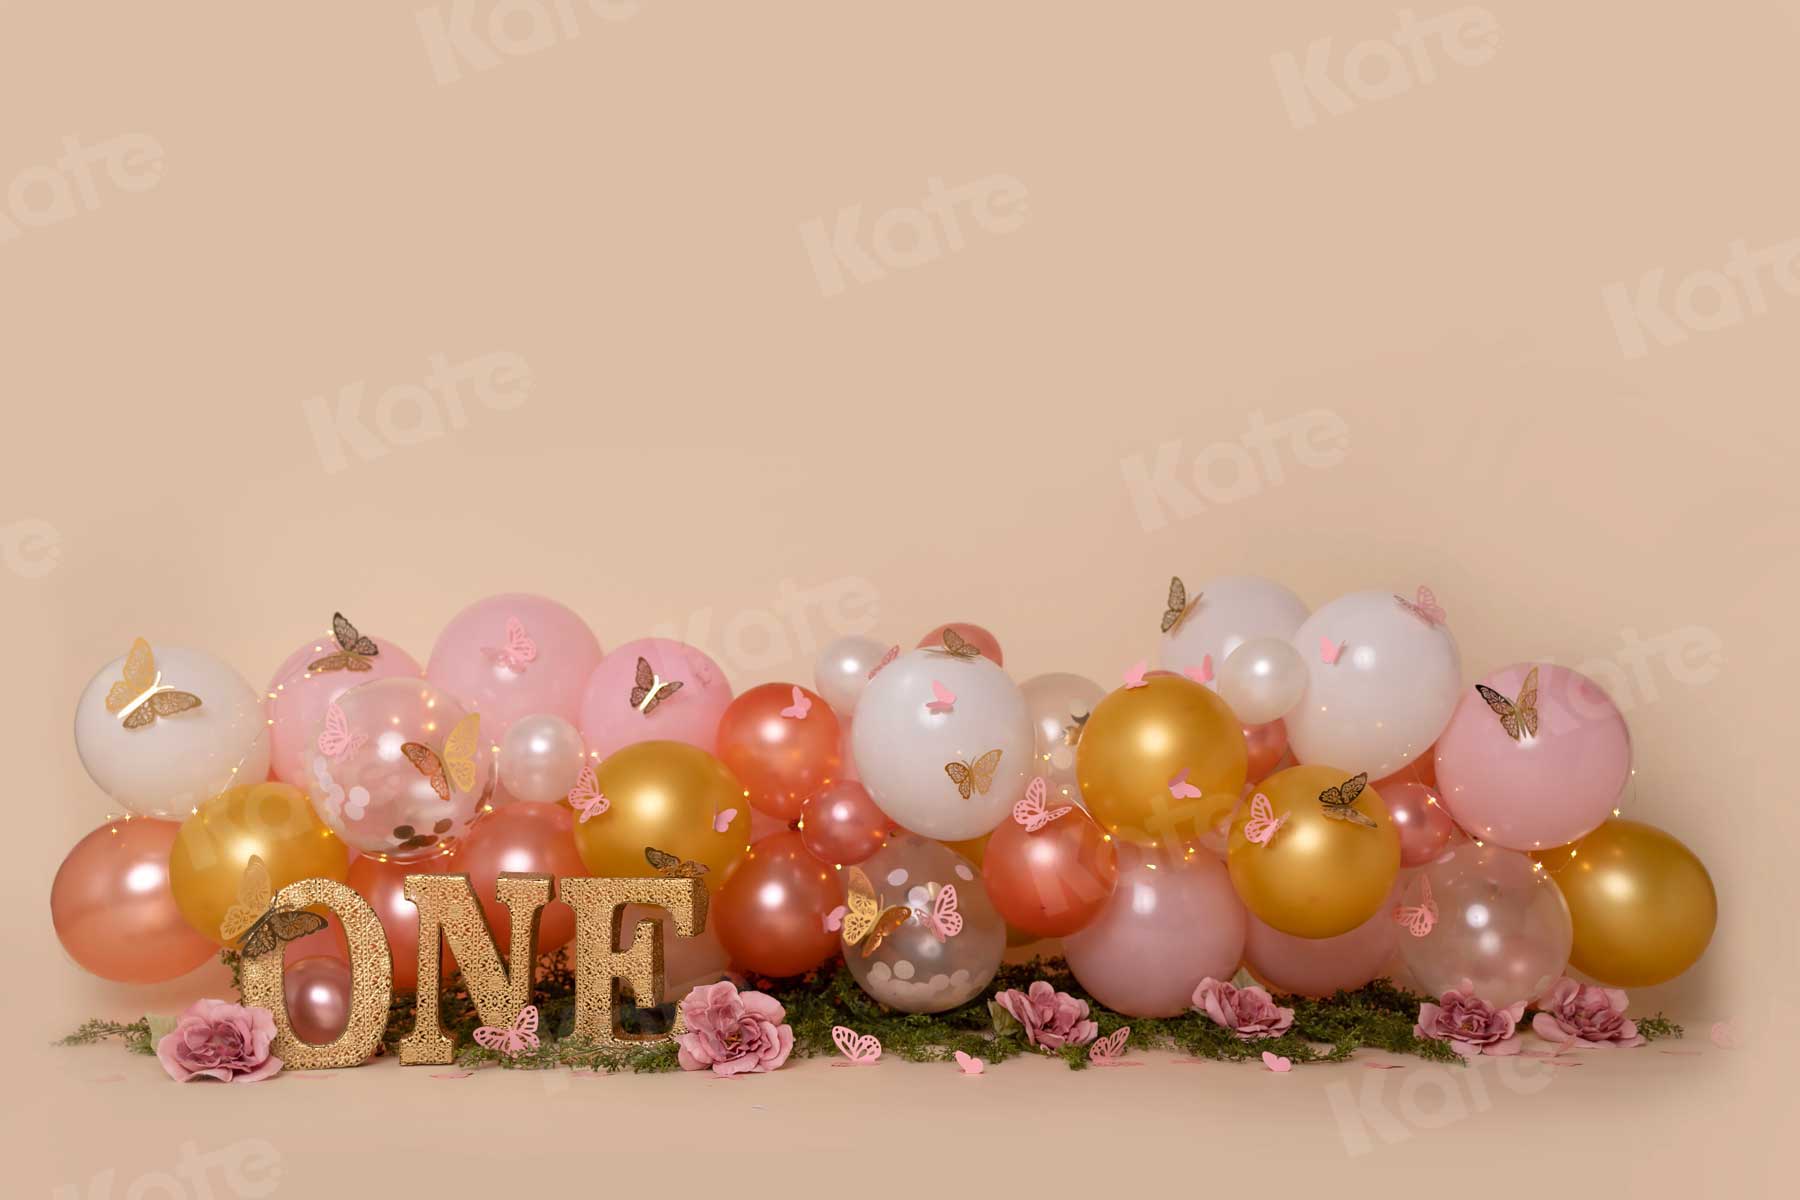 Kate Birthday Cake Smash Balloon with Butterfly Backdrop for Photography Designed by Cassie Christiansen Photography